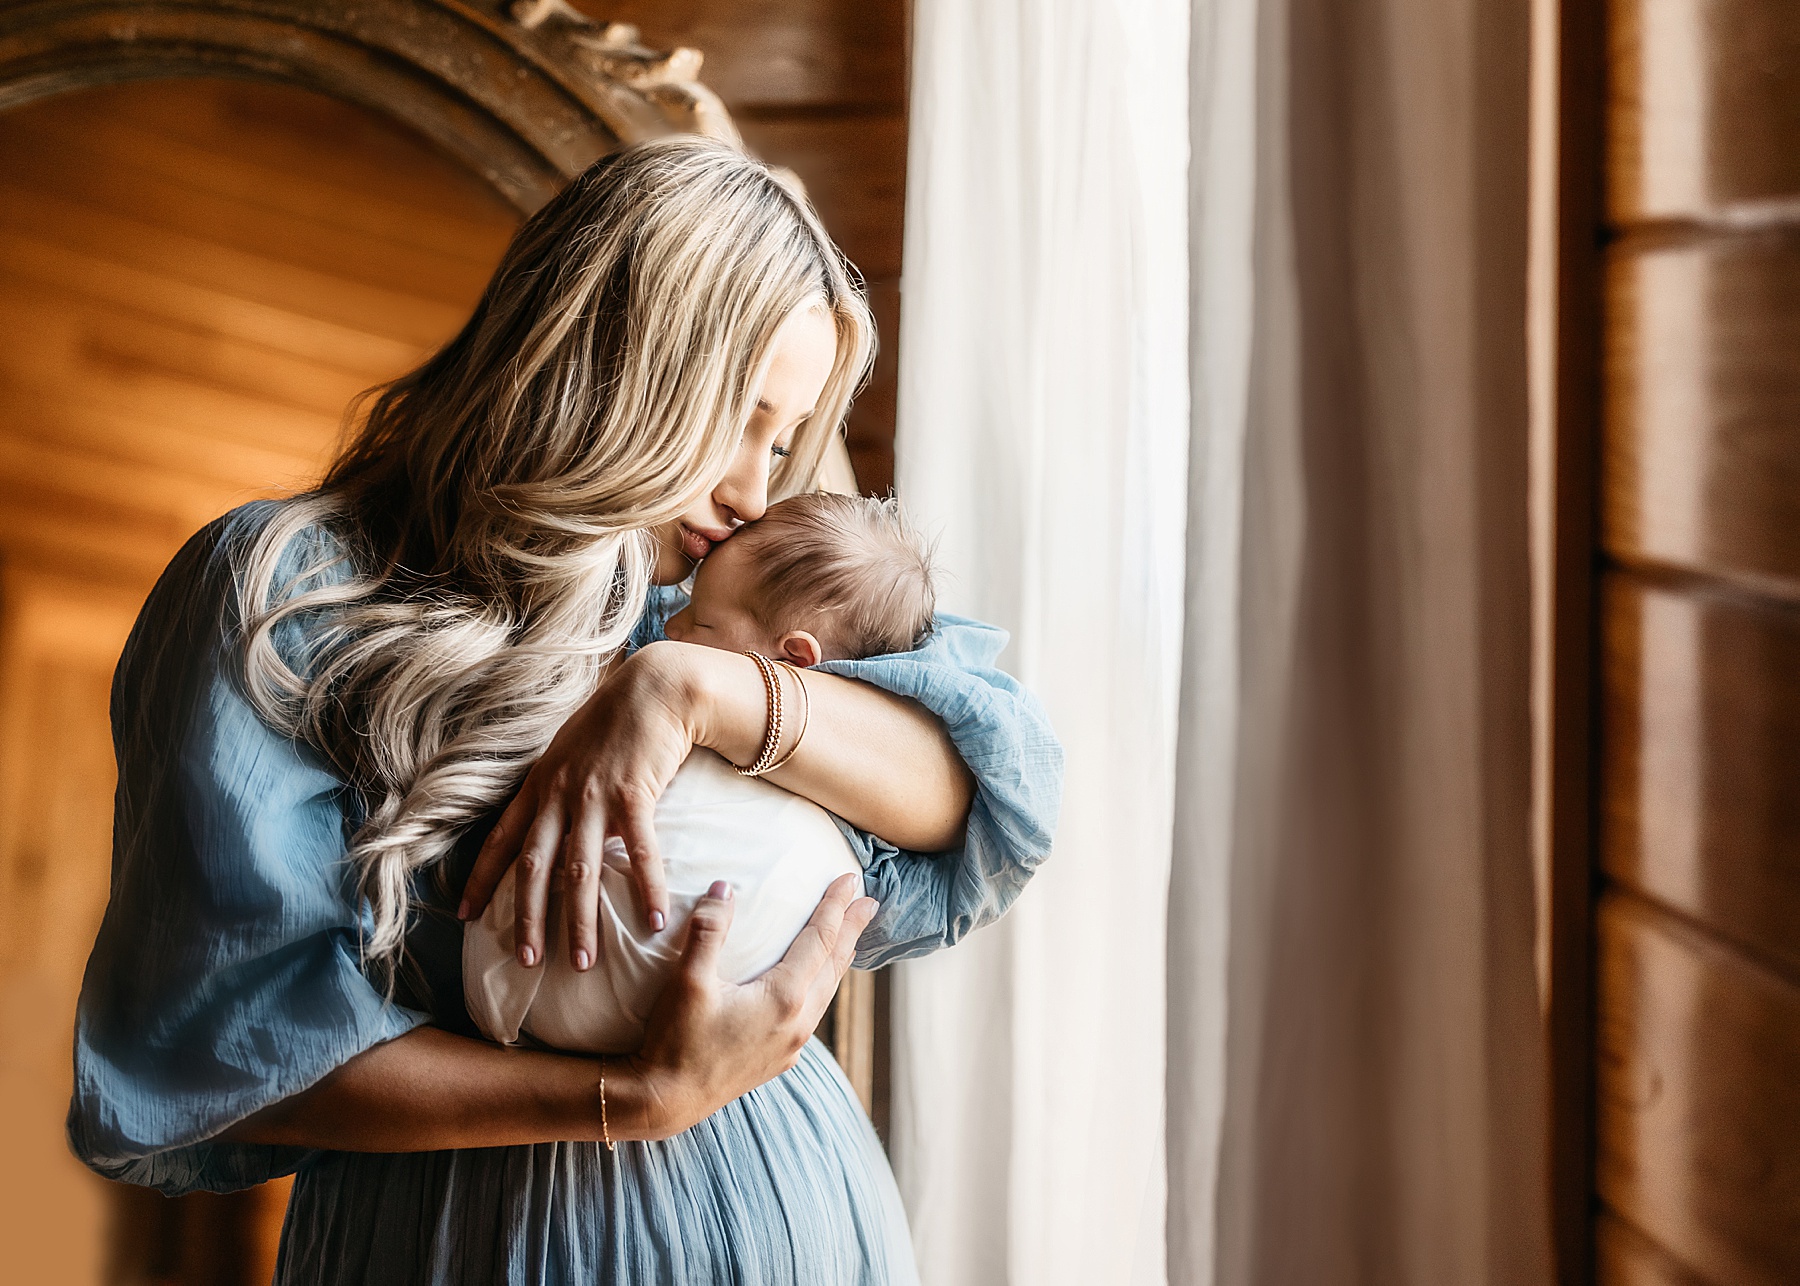 woman with long blond hair kissing baby boy wrapped in white swaddle